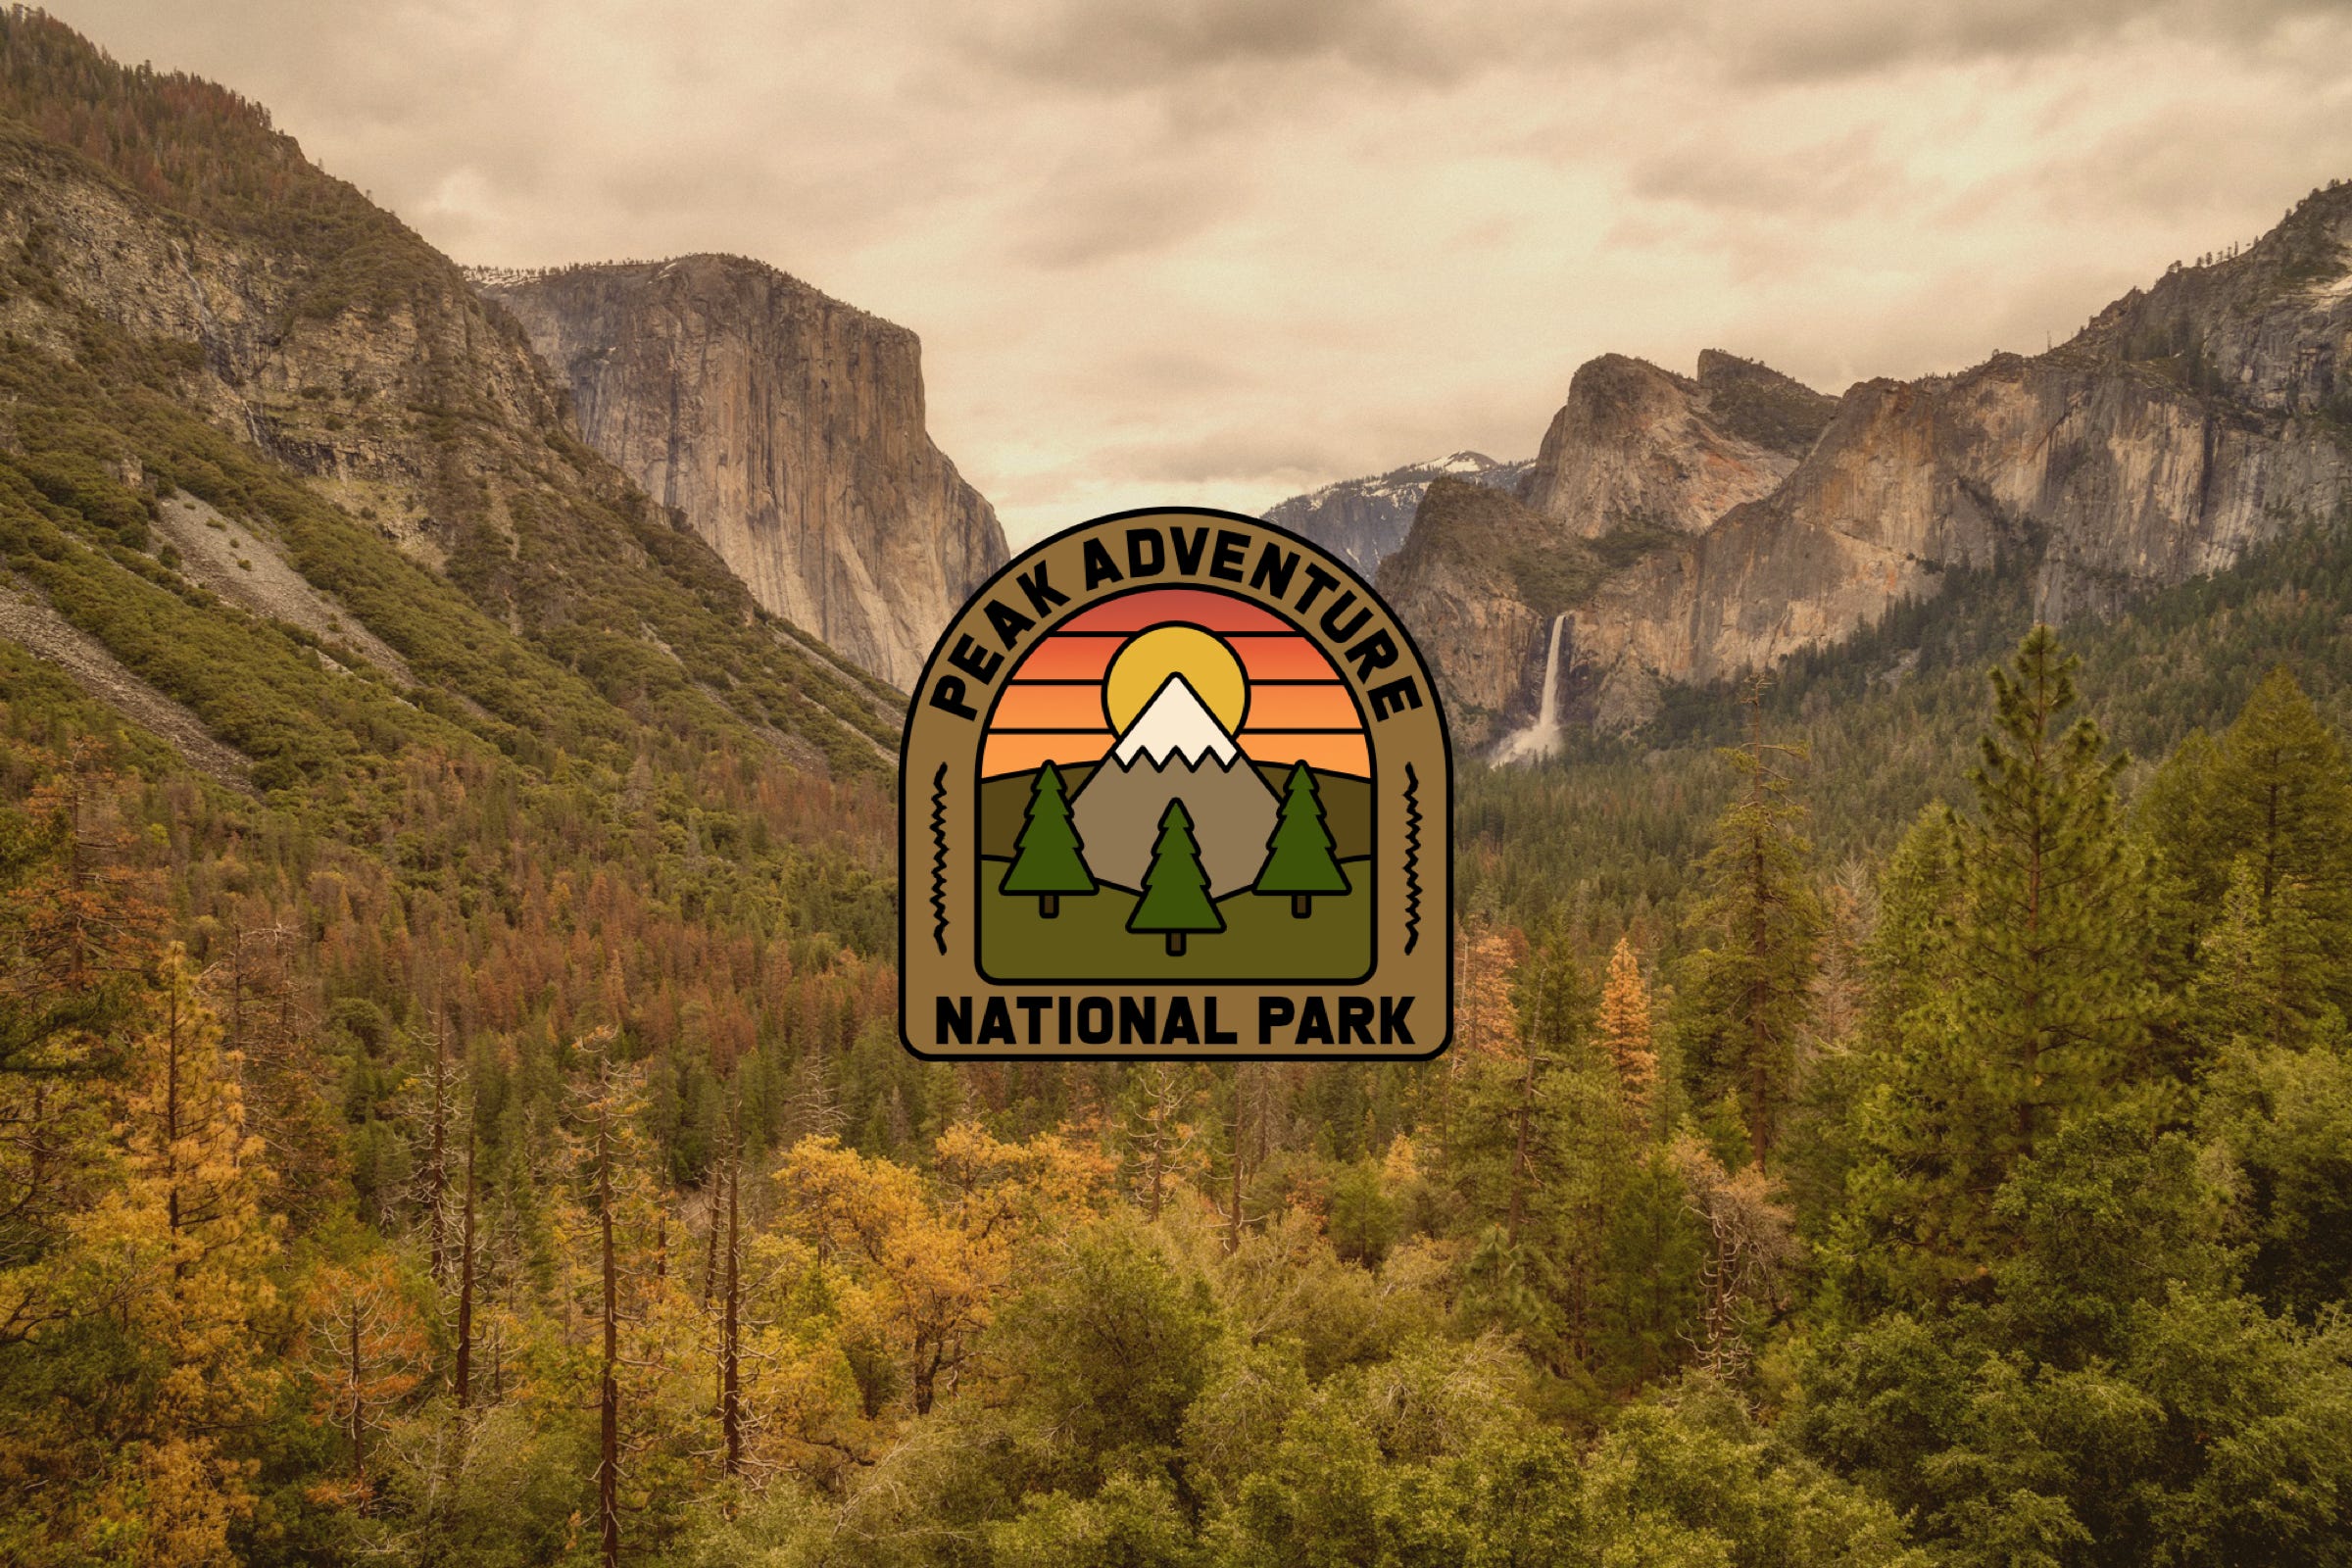 Peak Adventure - National Park Logo with Forest Background